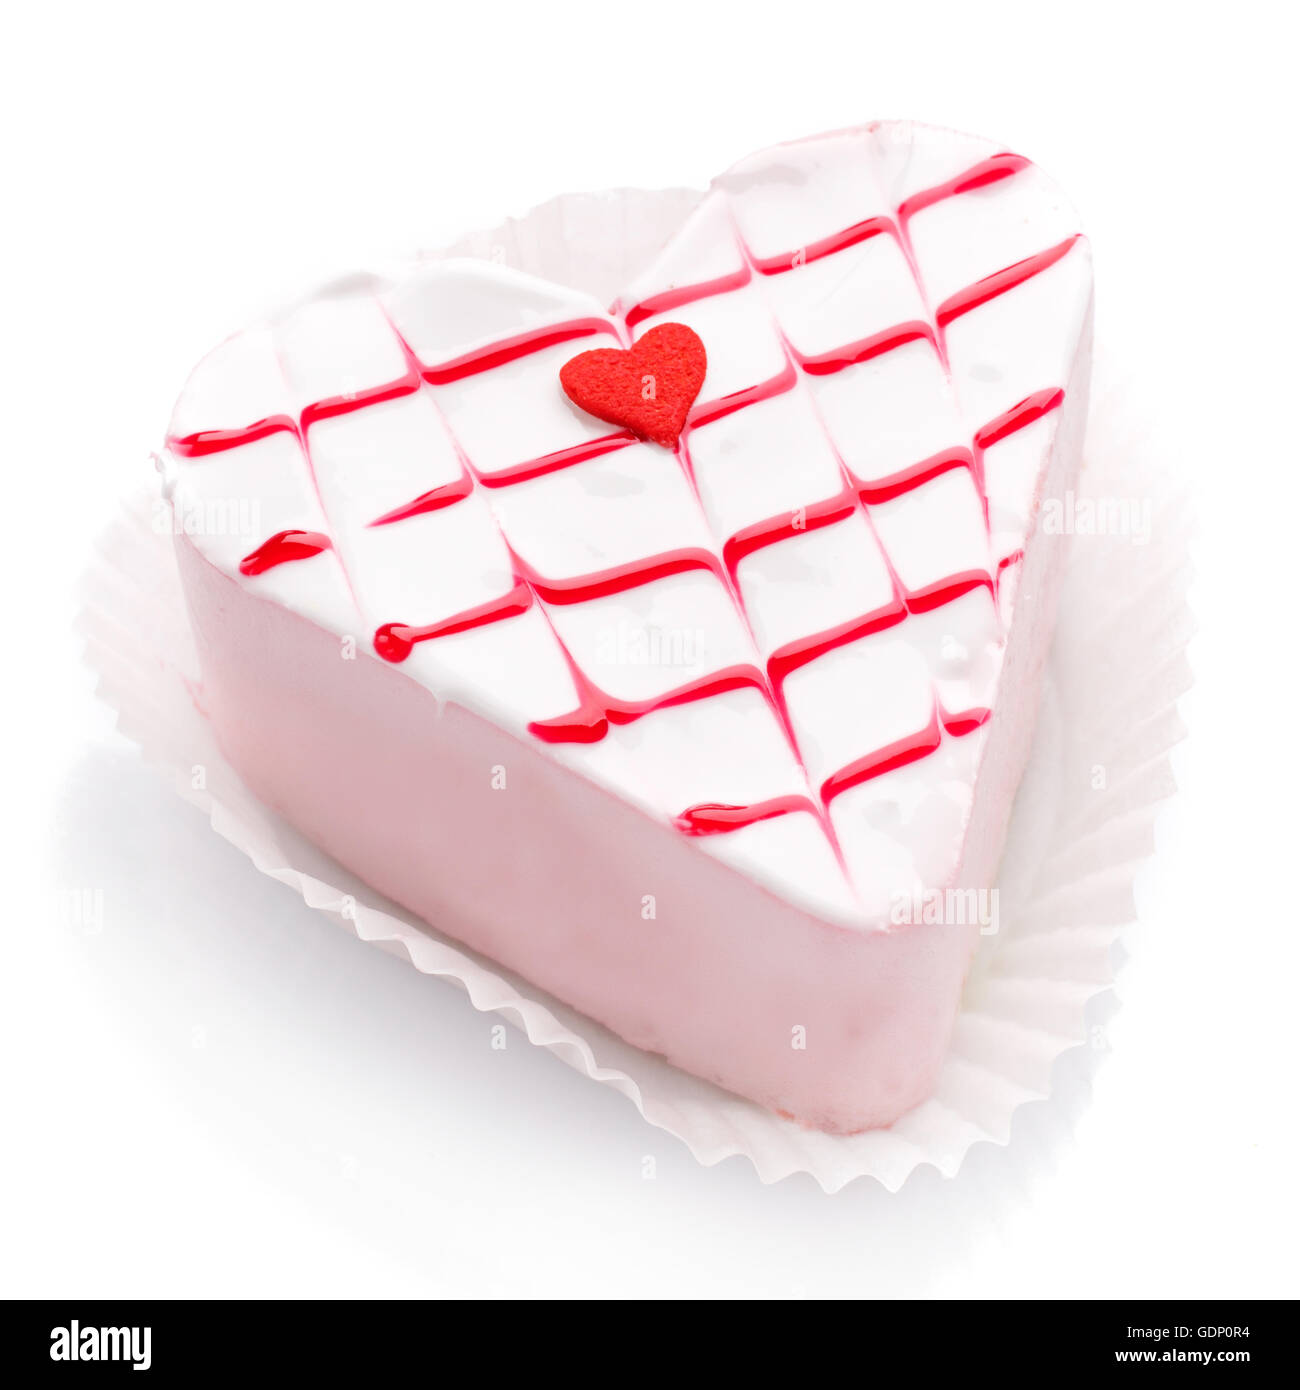 tasty delicious, sweet snack heart shaped on a white background Stock Photo